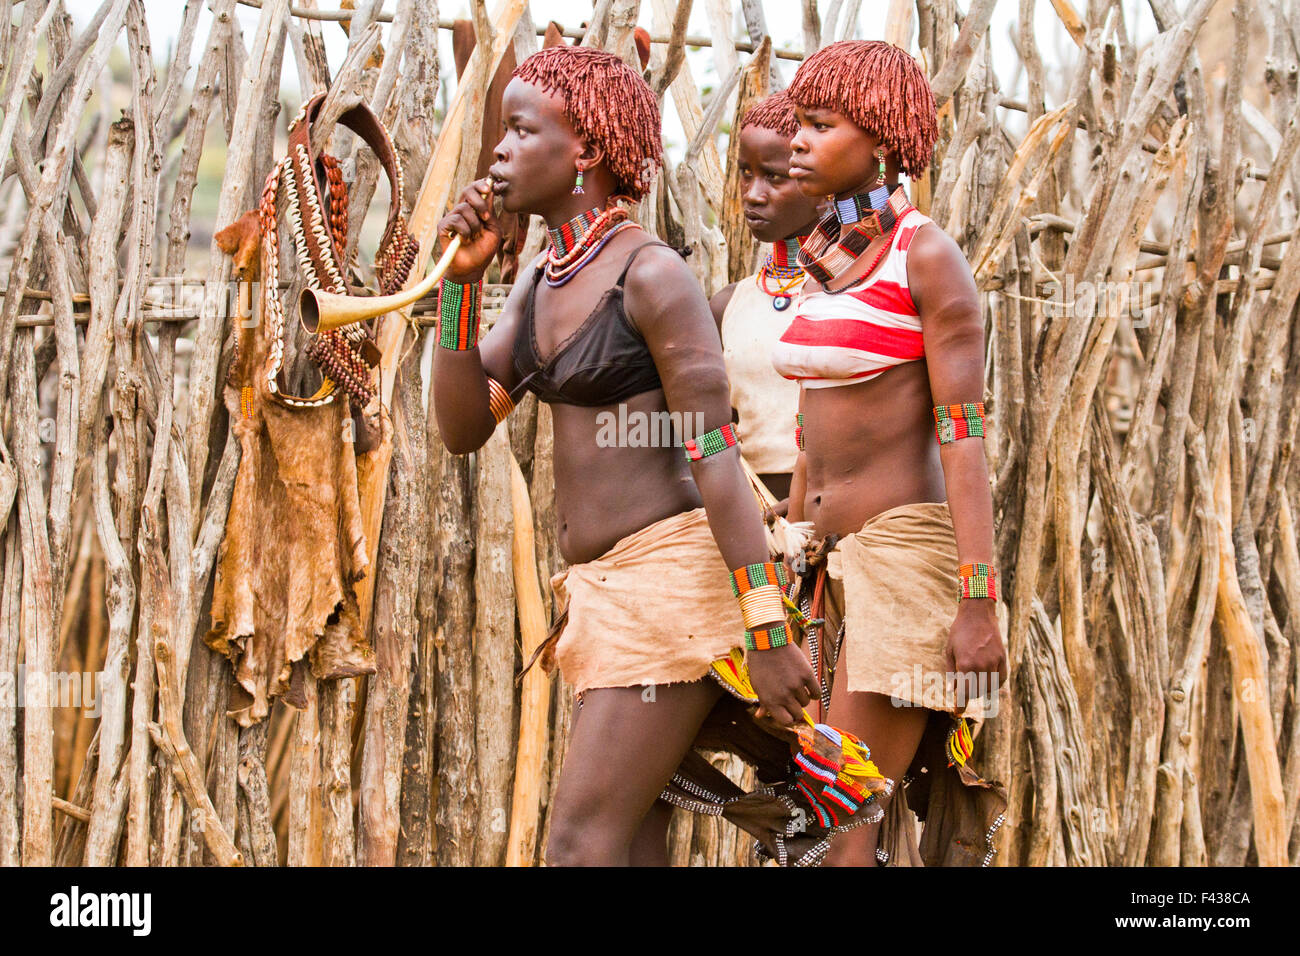 Hamer Women anxiously wait at the traditional whipping ritual. Omo Valley, Ethiopia Stock Photo